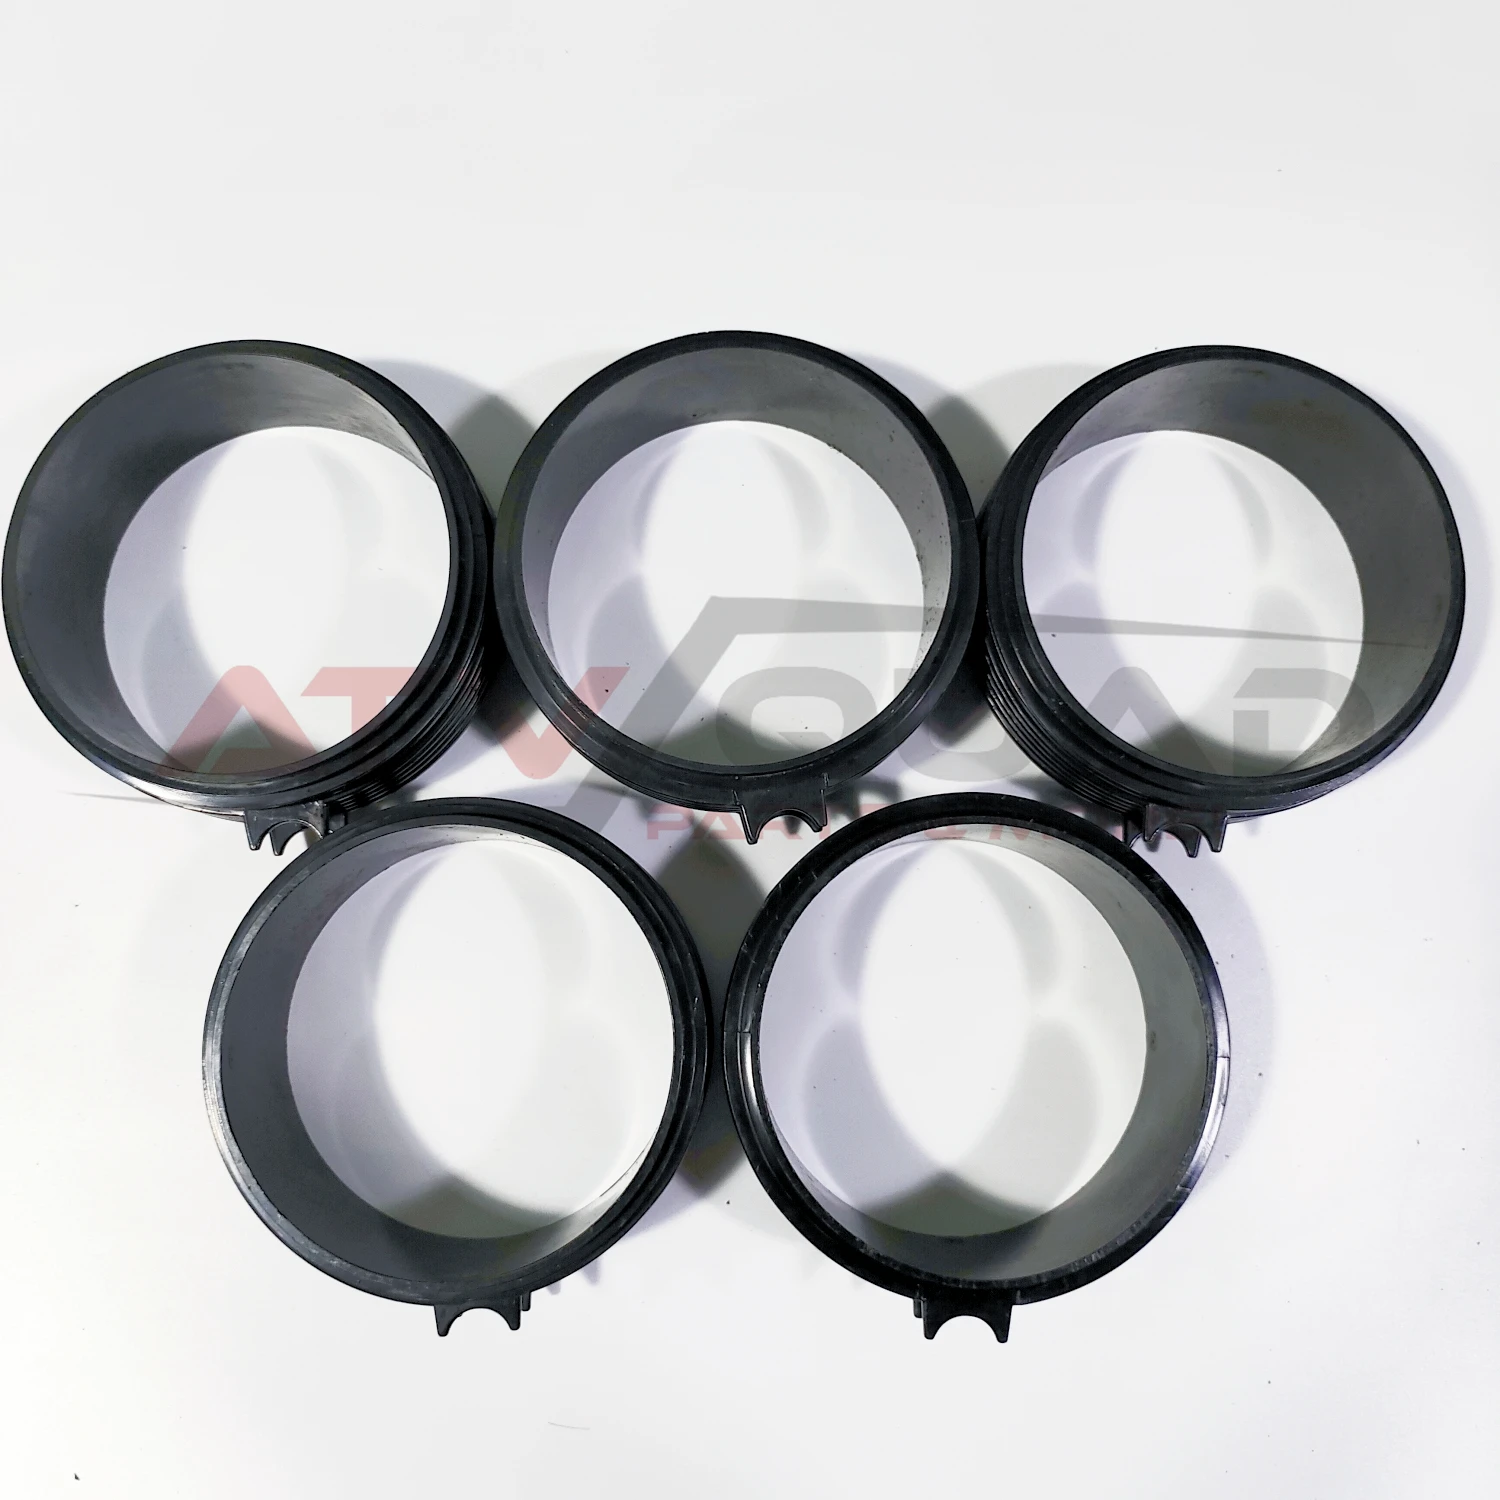 5PCS 140MM Wear Ring for Sea-Doo BRP Spark 60 90 2UP 3UP 900 HO ACE TRIXX IBR 267000813 267000883 267000925 motorboat jet pump wear for seadoo brp spark wear 2 up 3 up 900 ho ace updated version 267000617 267000813 s5d2